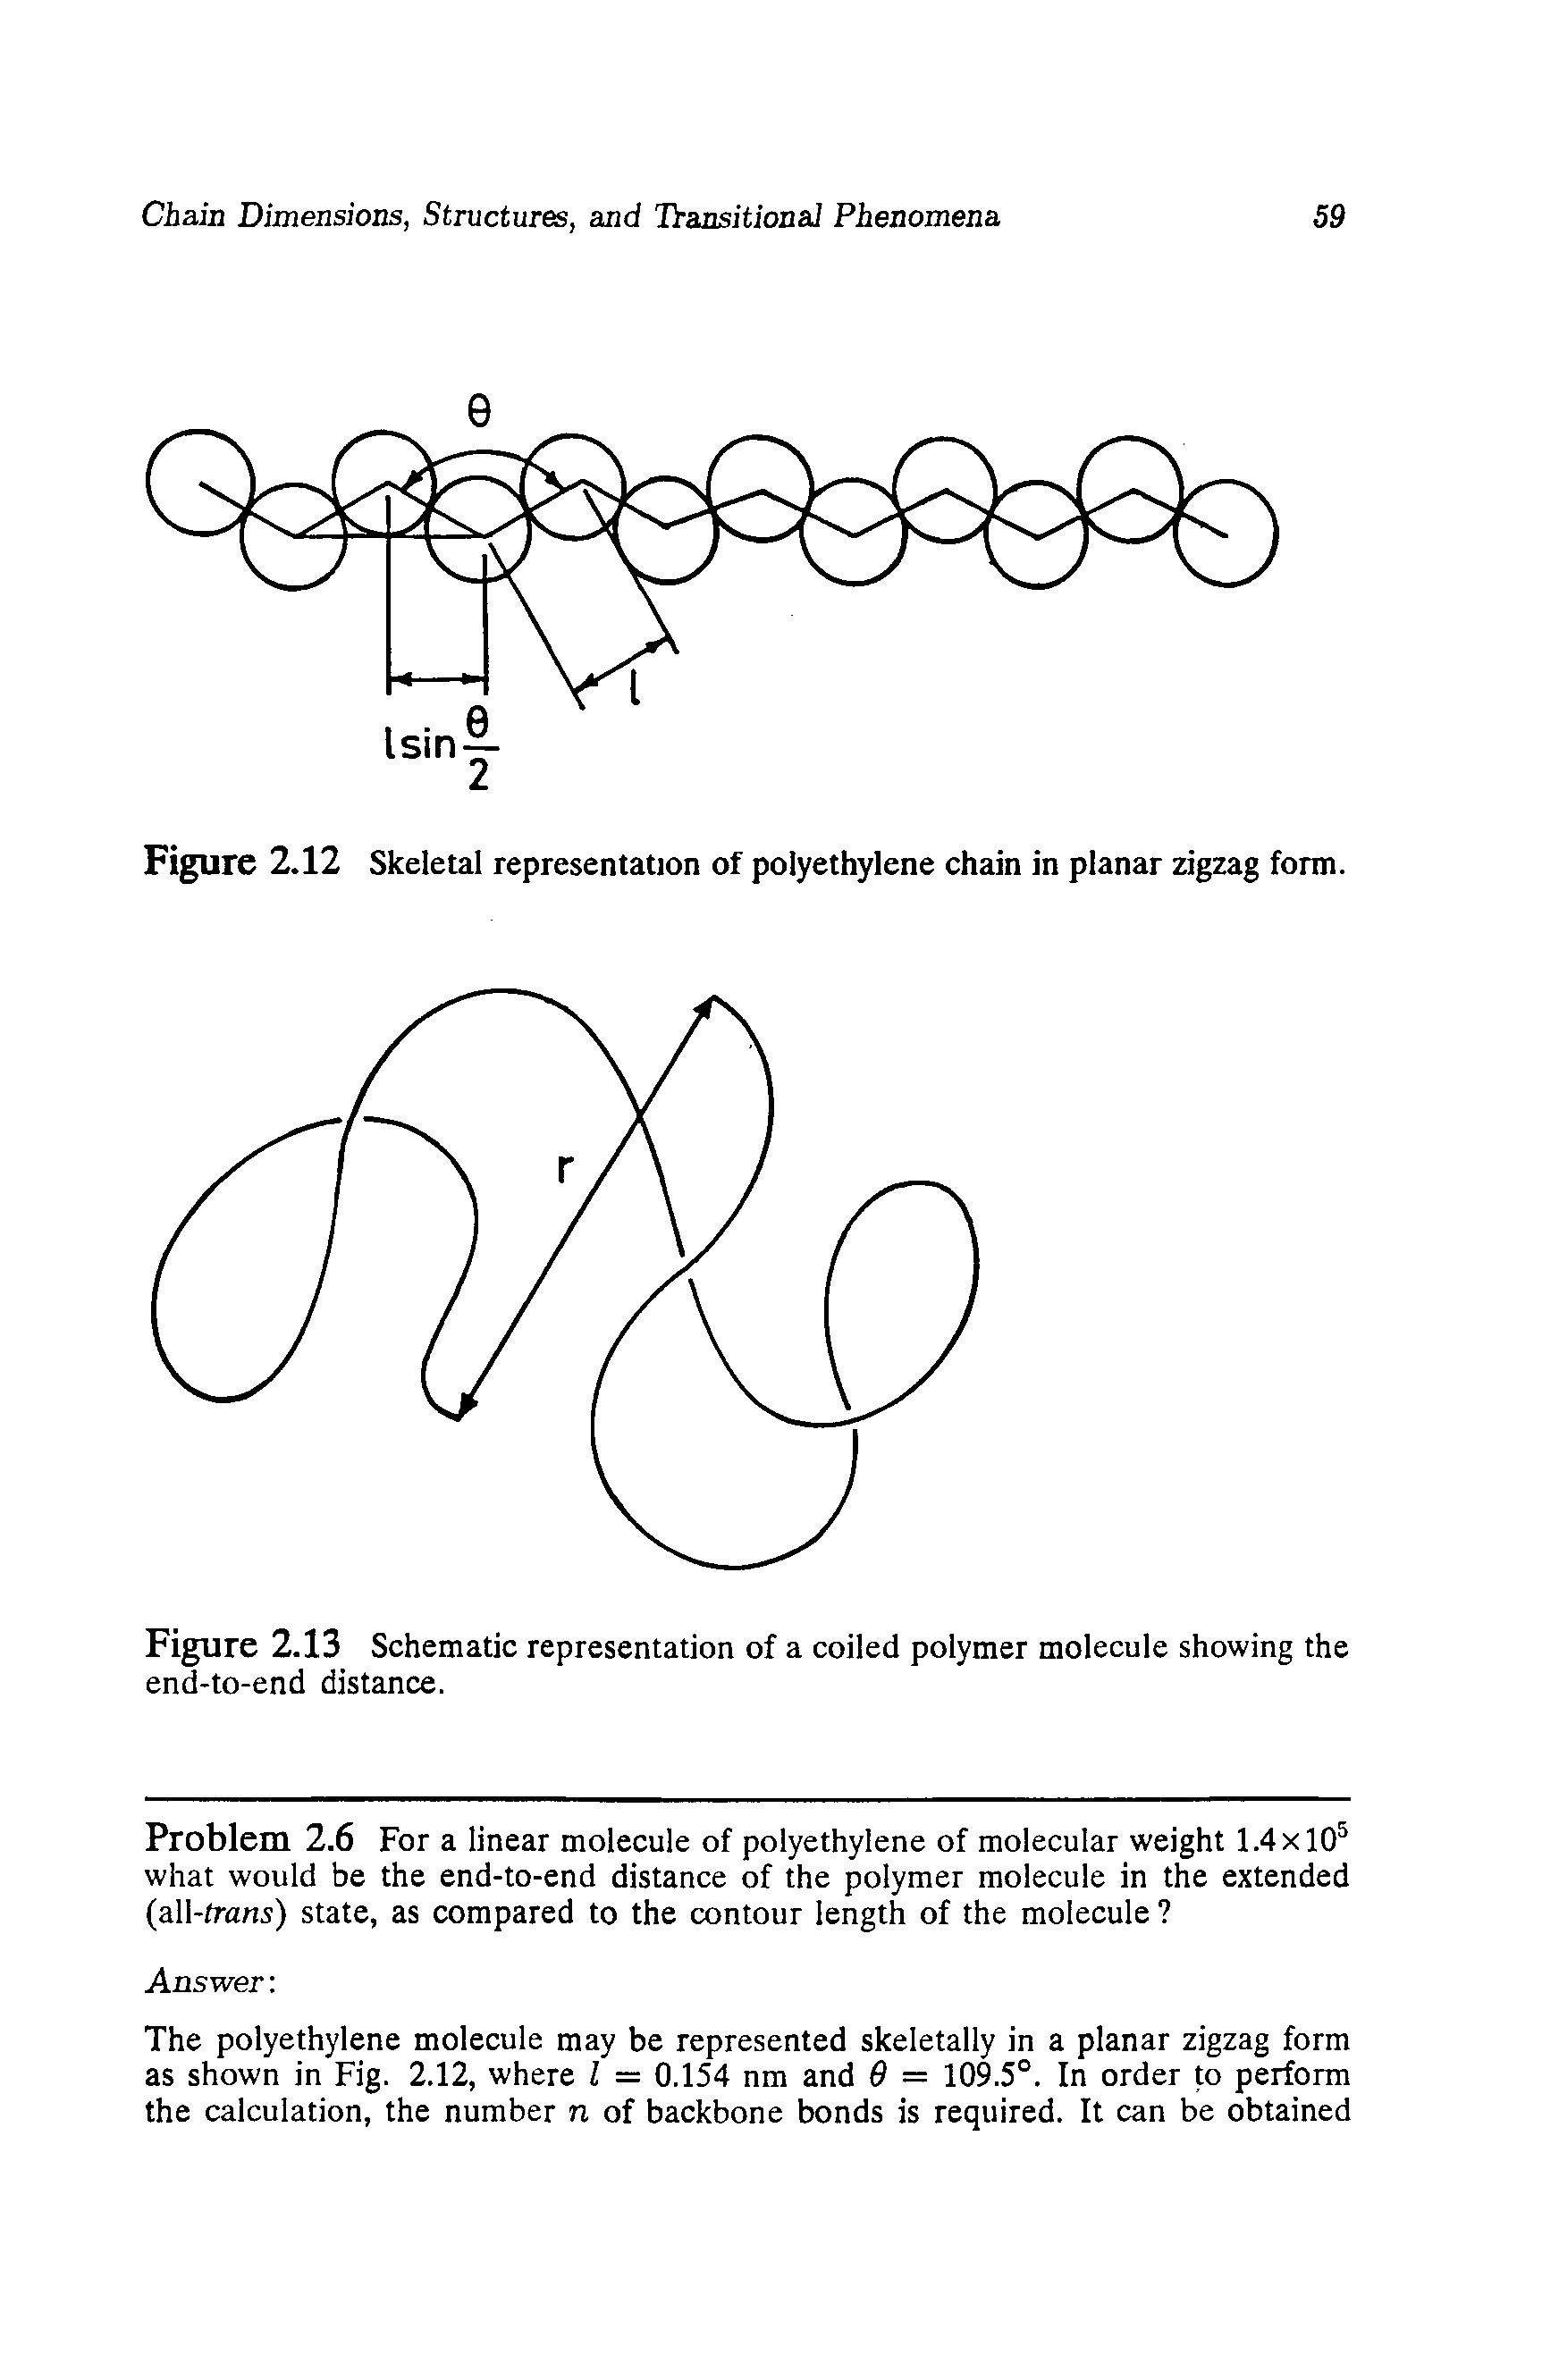 Figure 2.13 Schematic representation of a coiled polymer molecule showing the end-to-end distance.